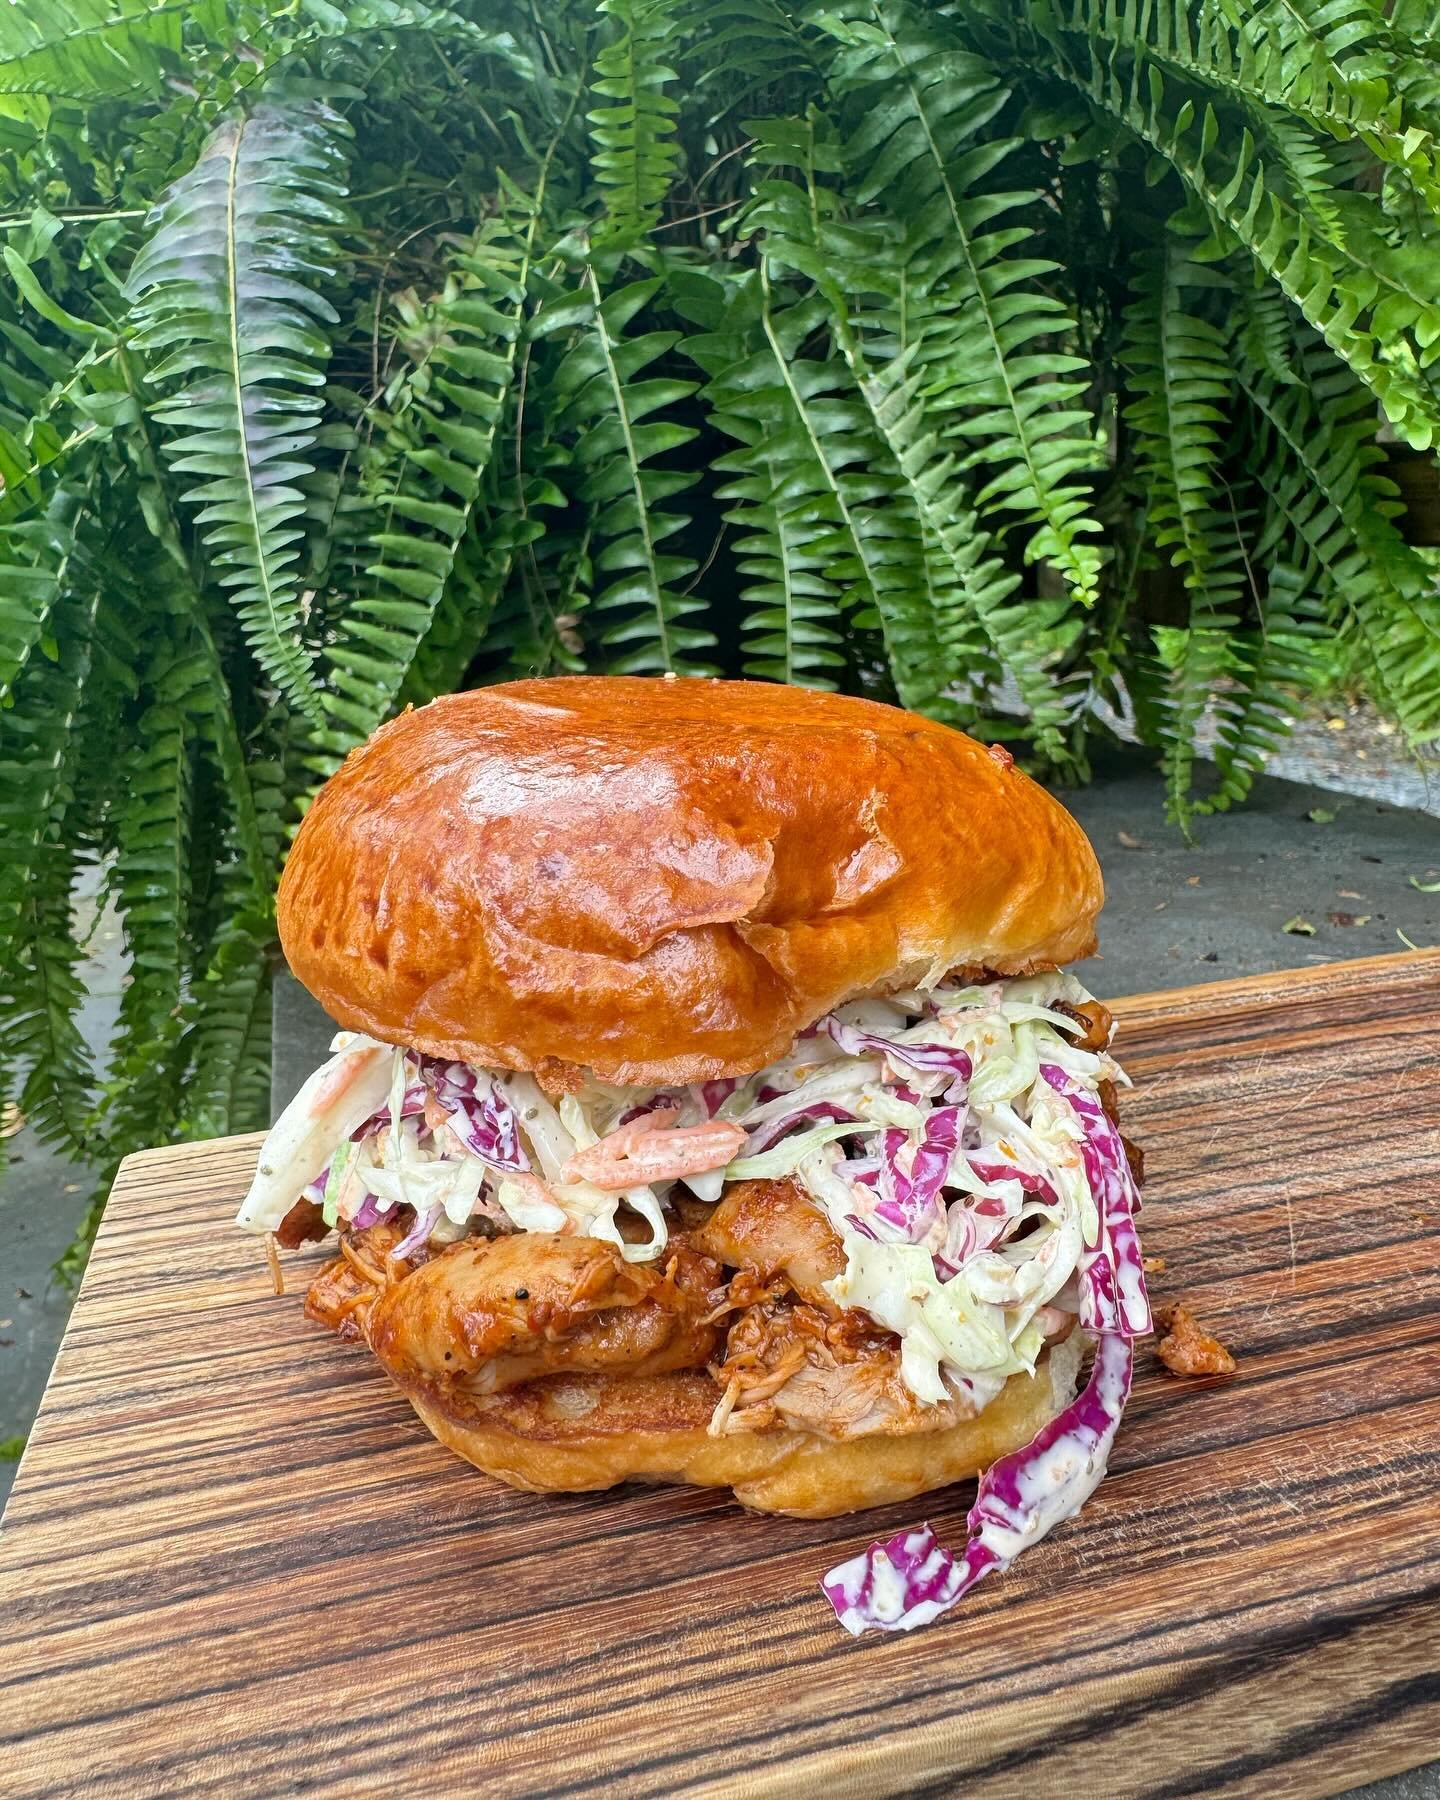 Chase the clouds away with our chicken bbq sandwich today! Topped with zesty orange slaw on toasted brioche!

Available today and tomorrow till 3pm!